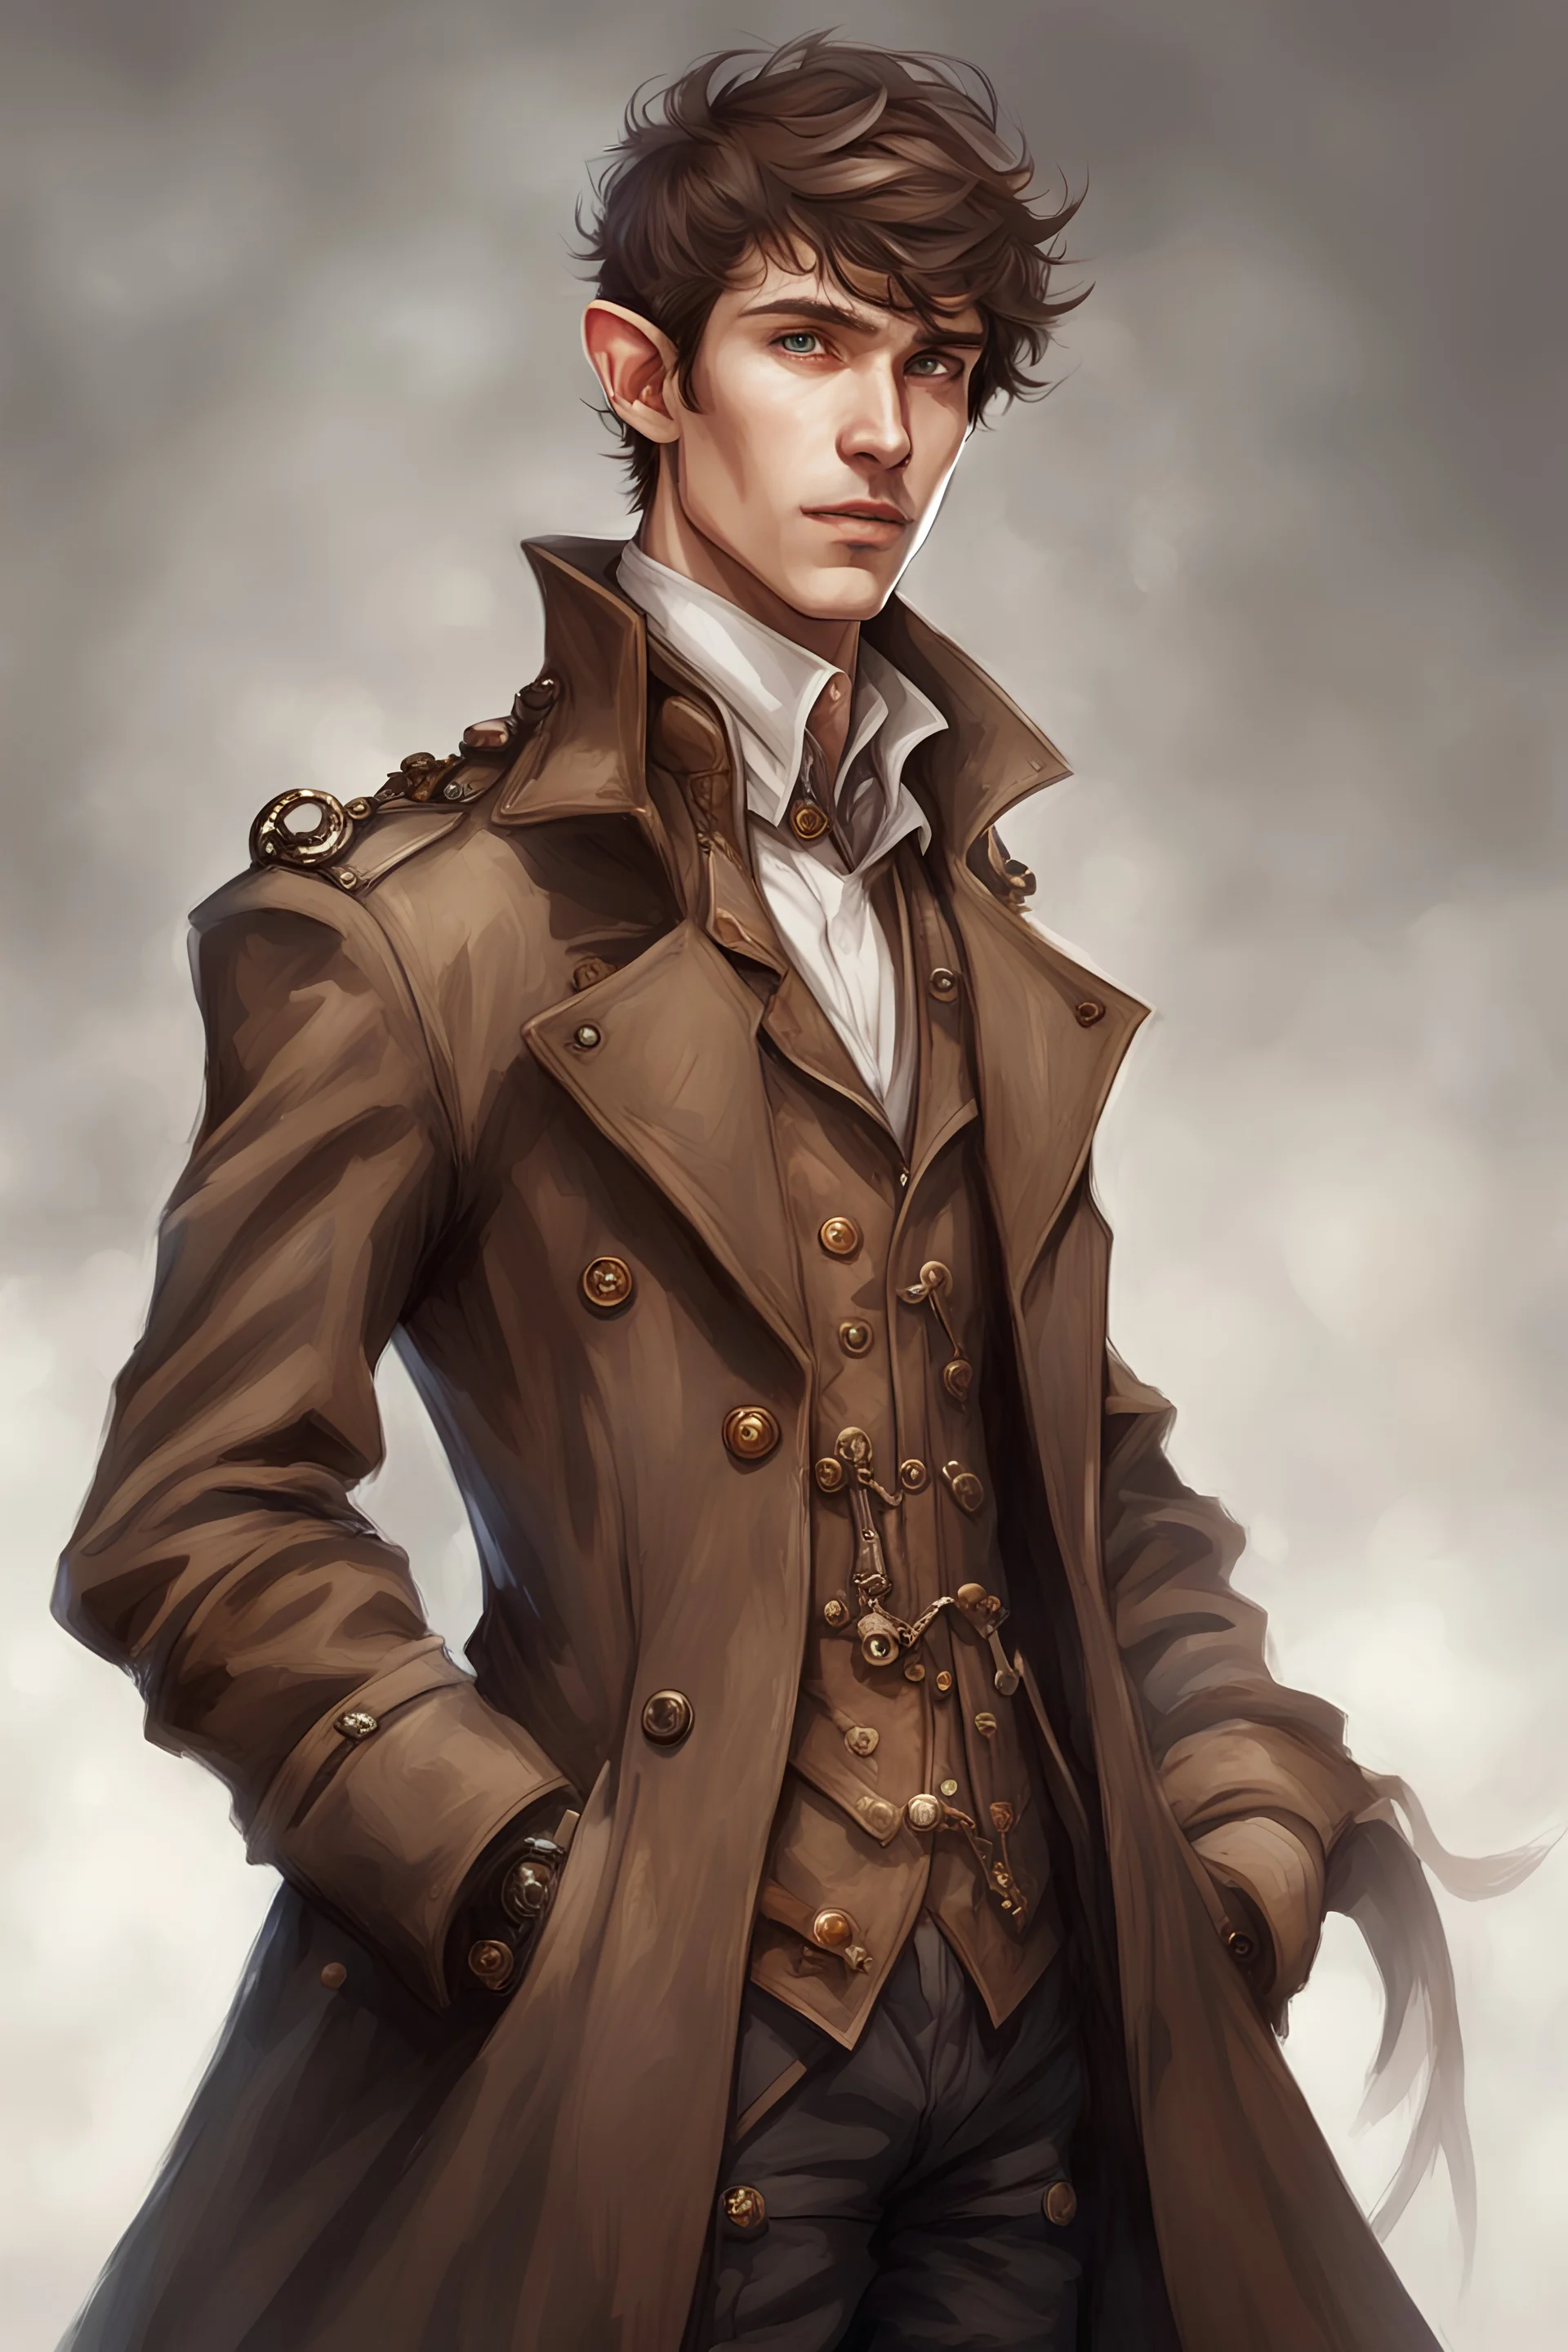 elf man of twenty years old, with brown eyes, short brown hair, dressed in a steampunk style trench coat.